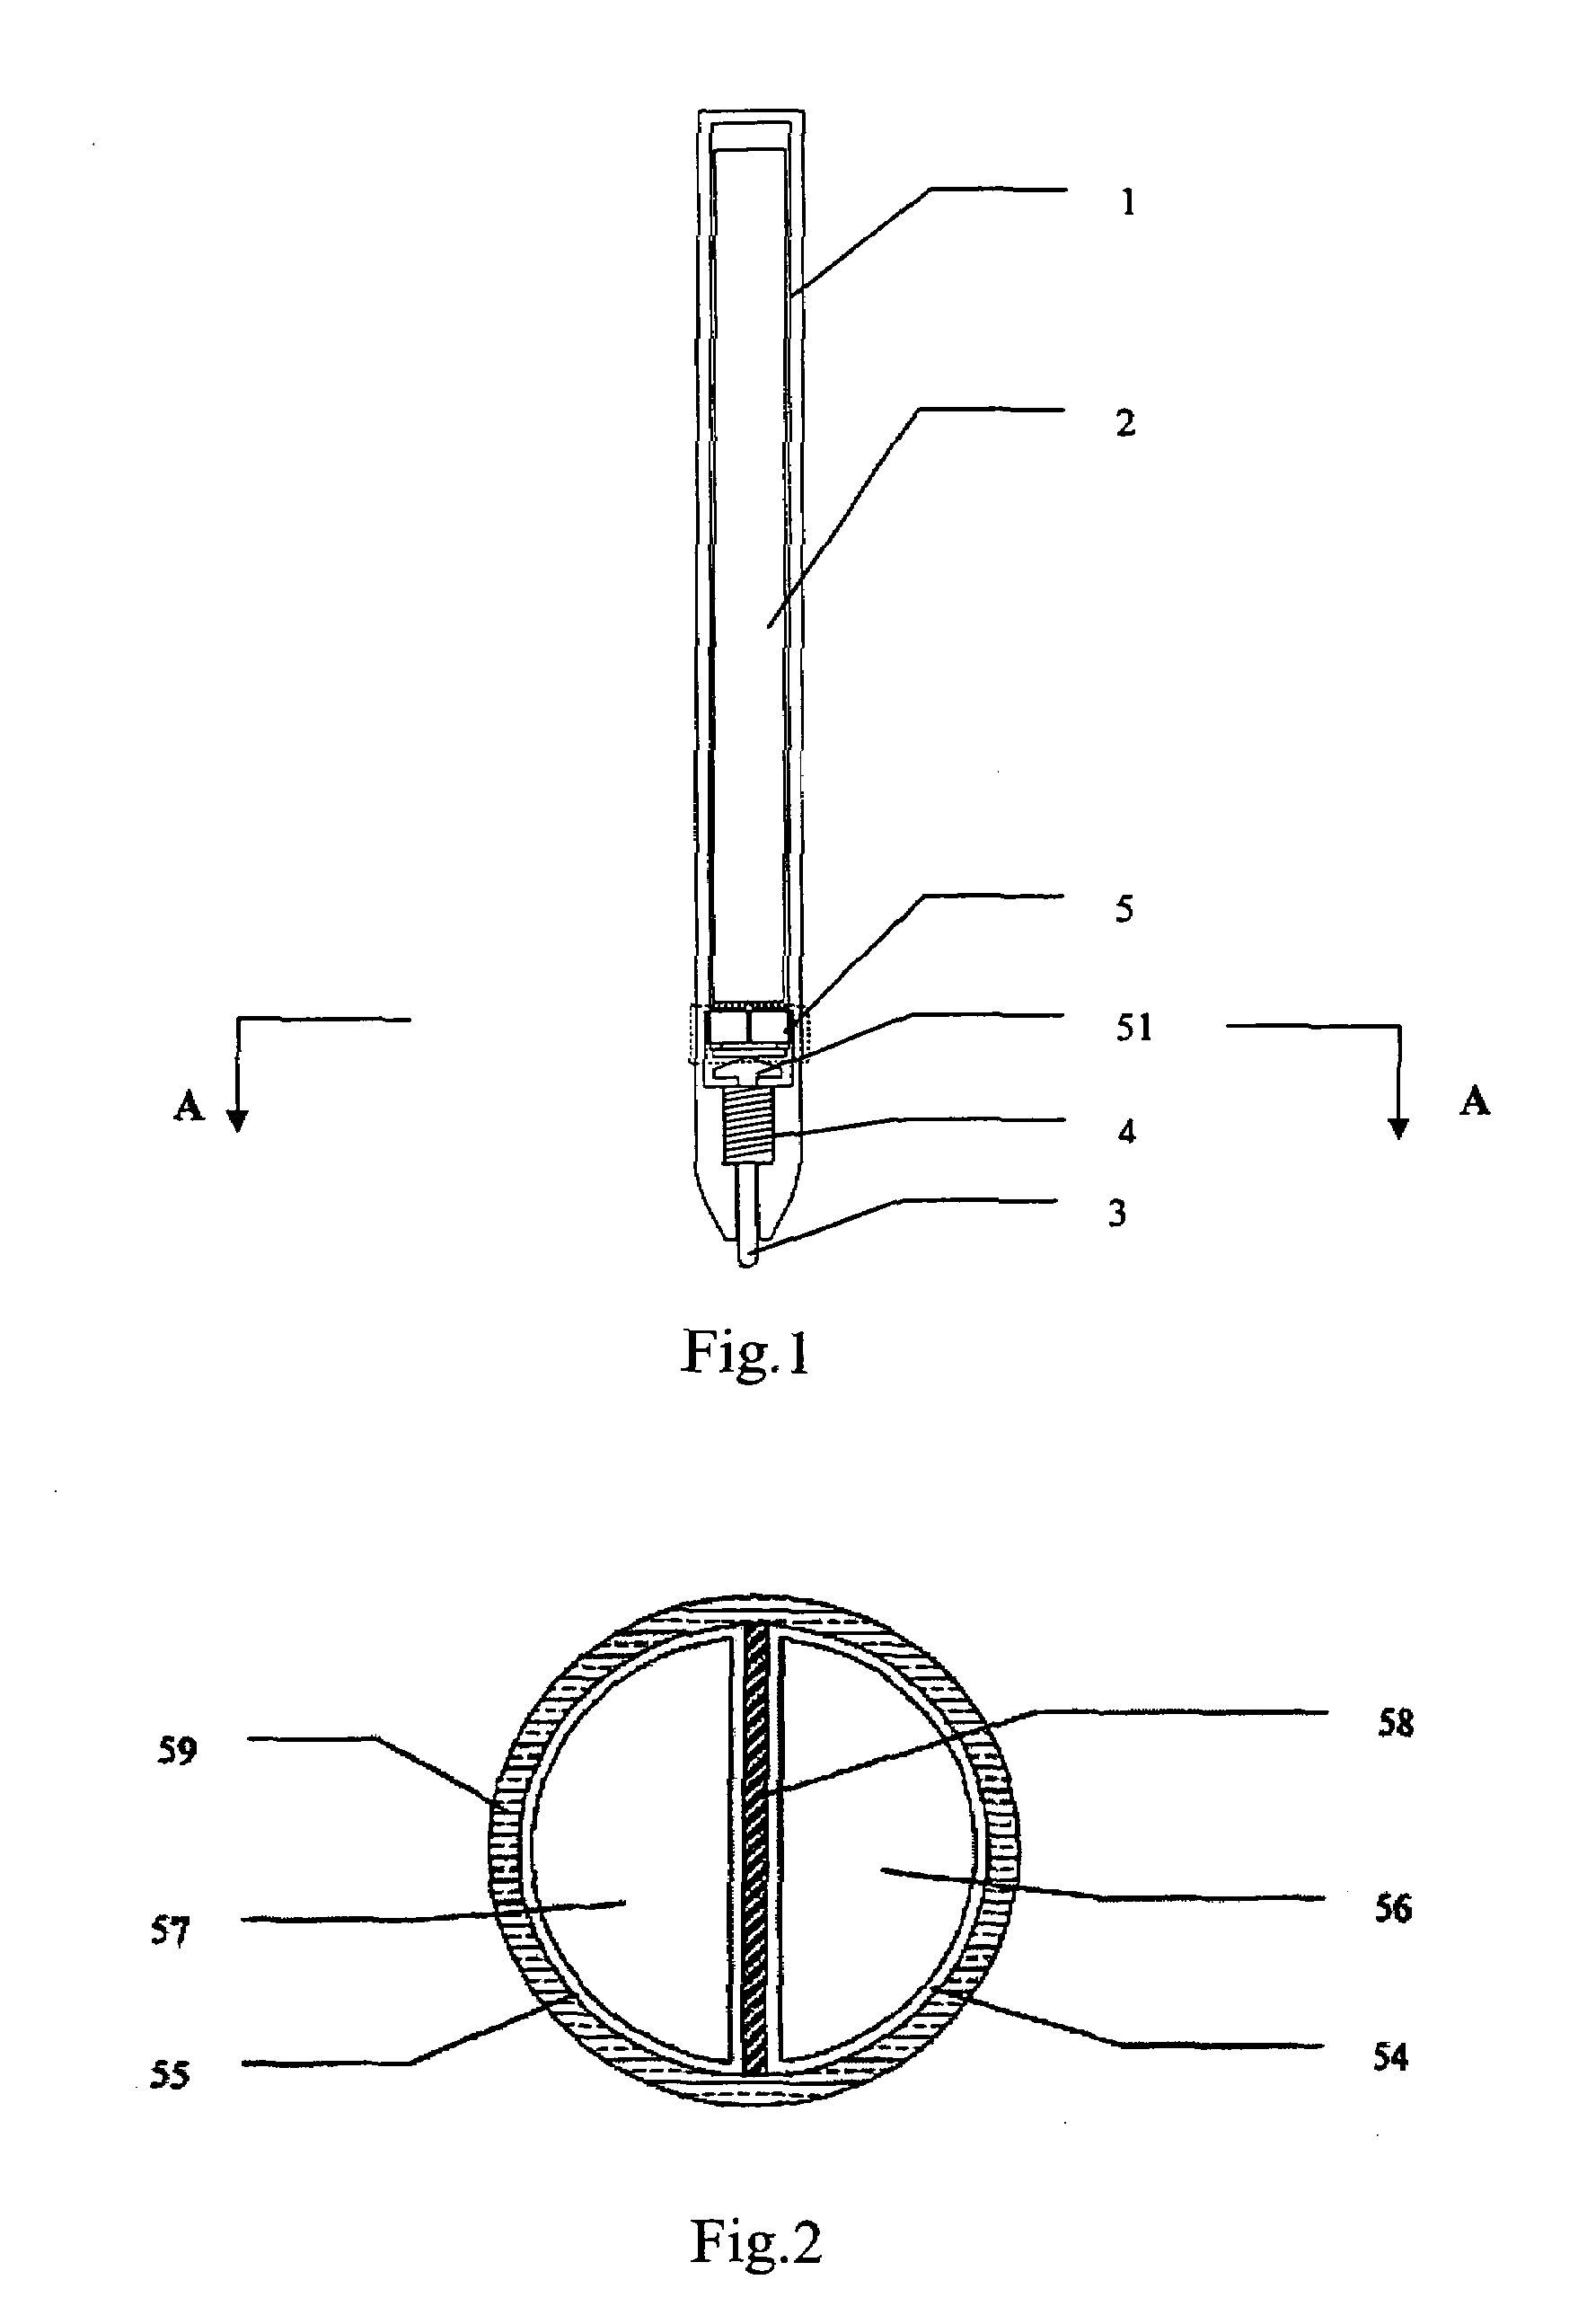 Device for varying capacitance